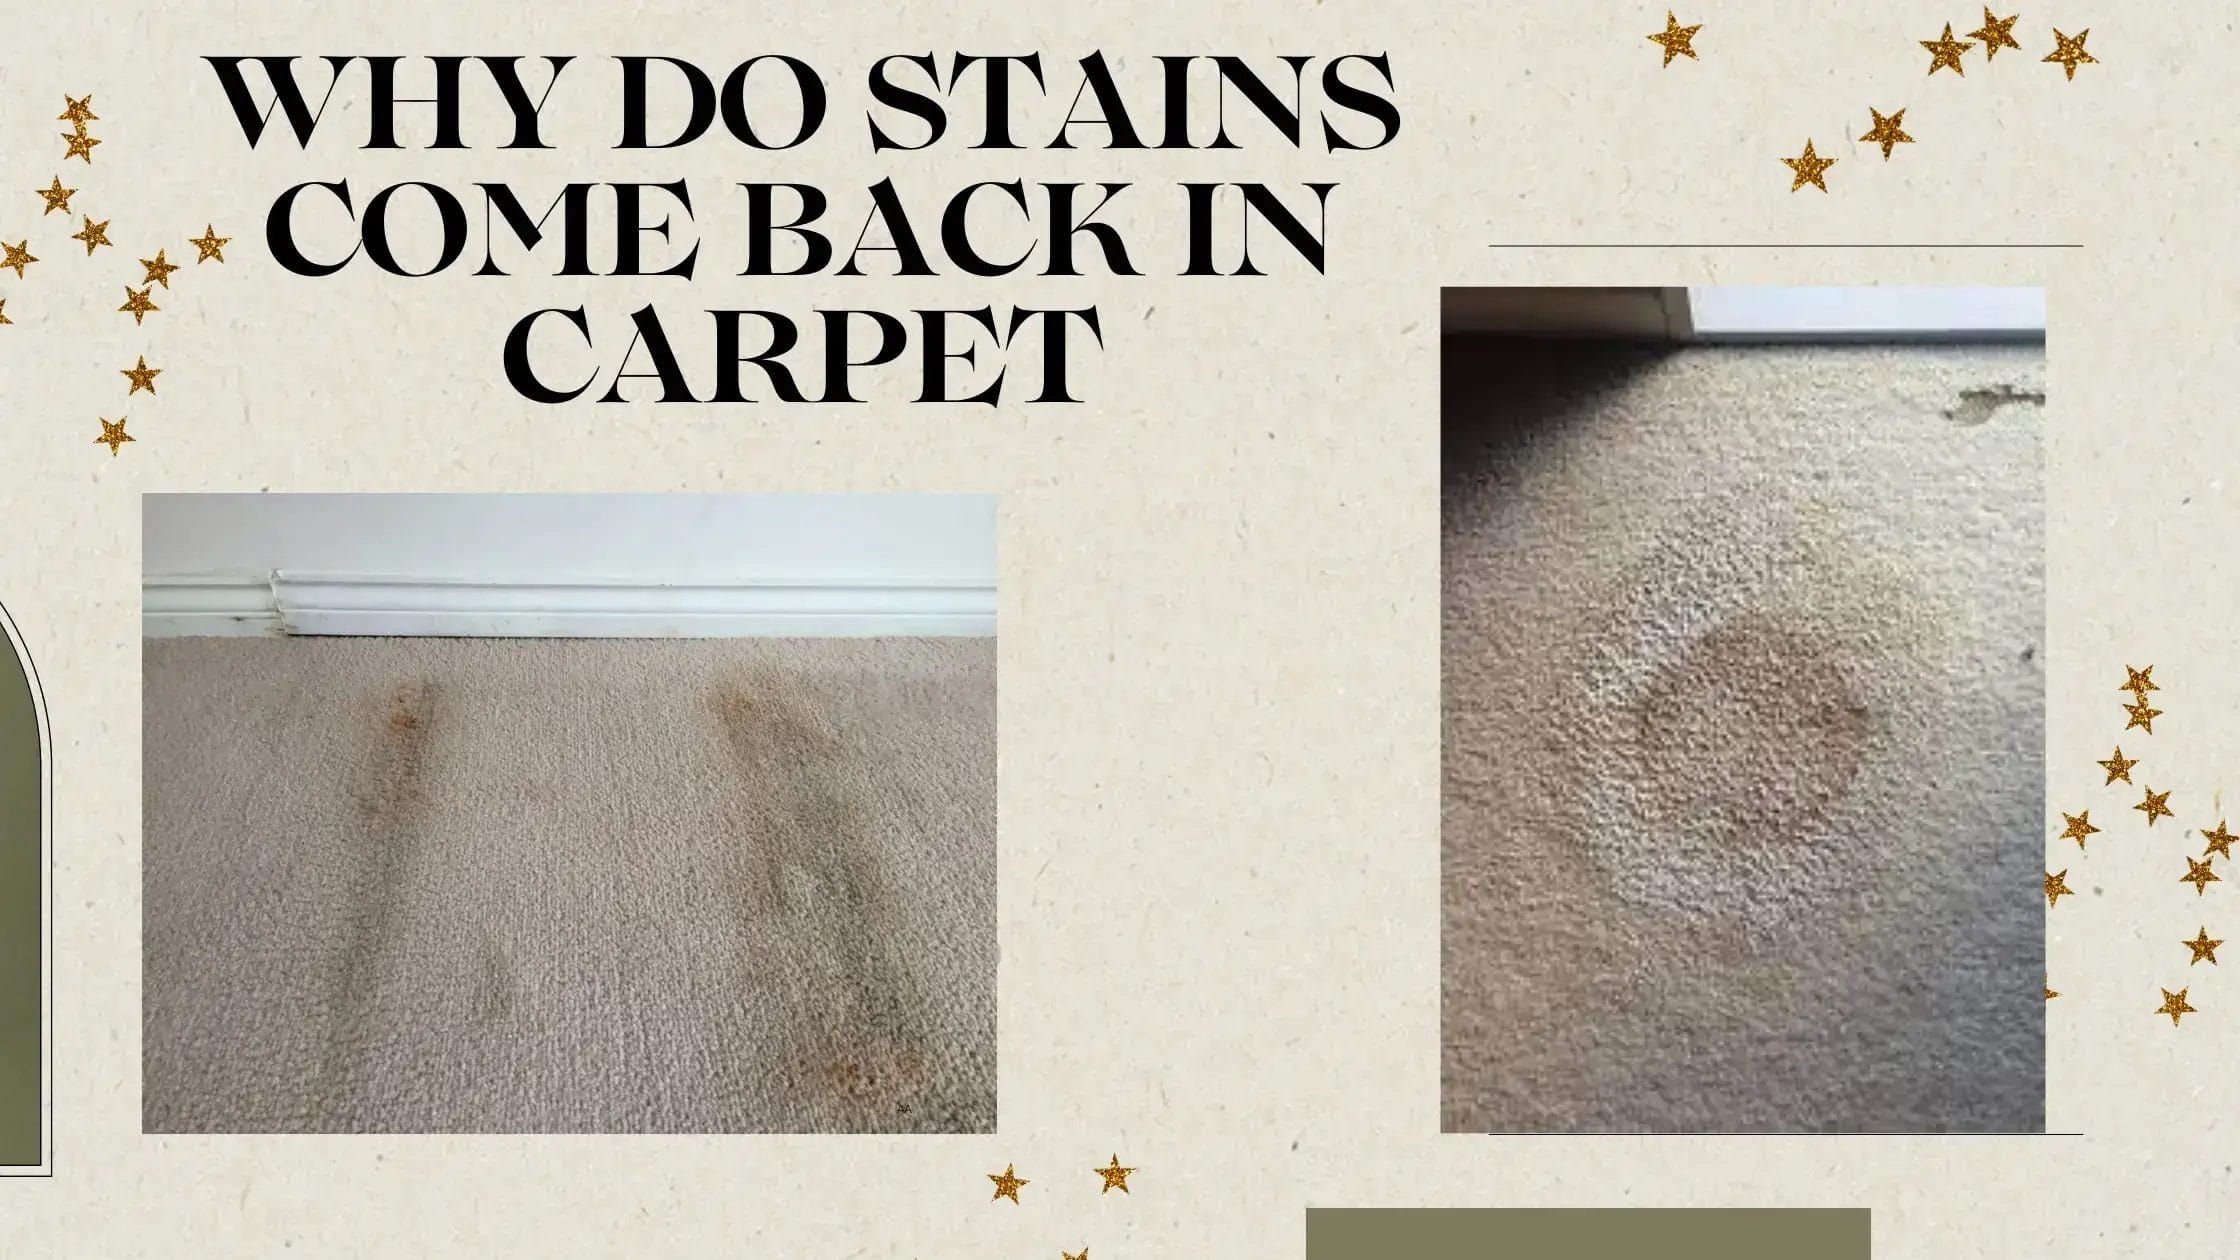 Why Do Stains Come Back in Carpet